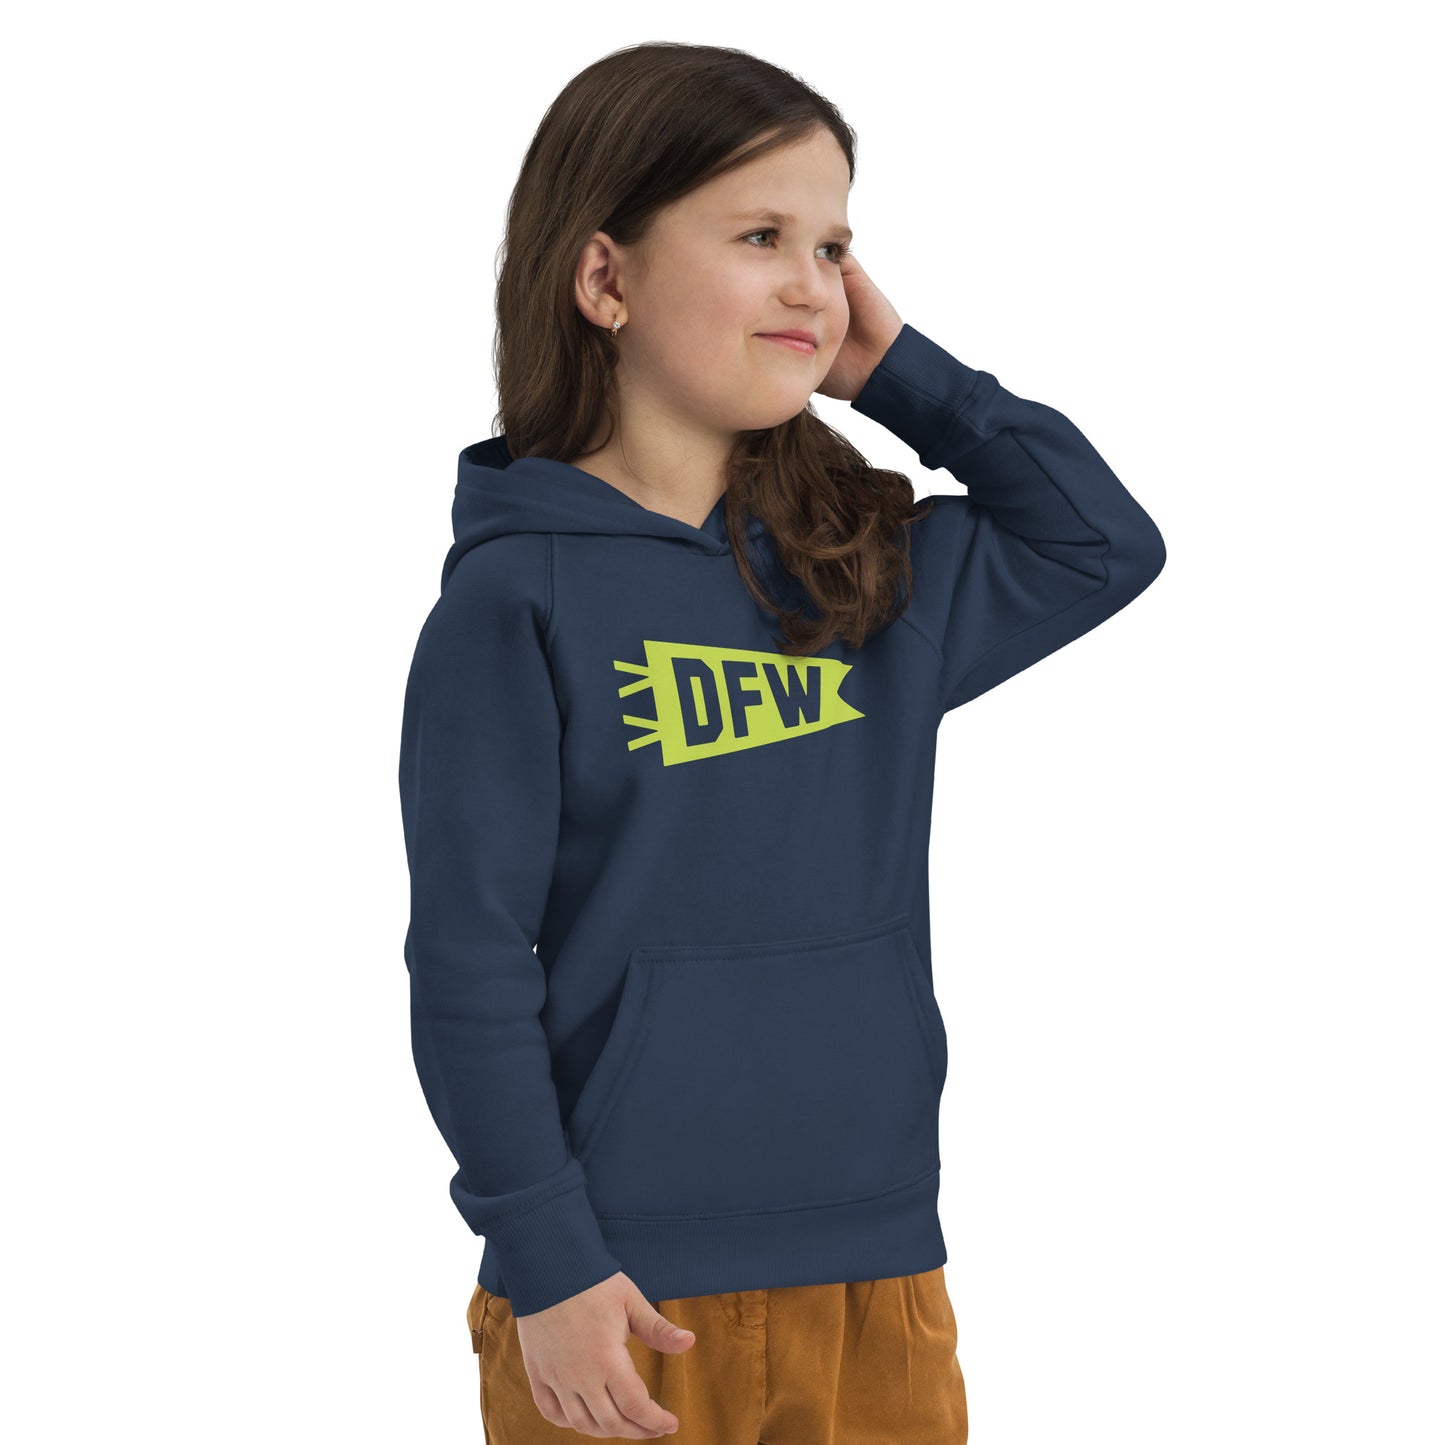 Kid's Sustainable Hoodie - Green Graphic • DFW Dallas • YHM Designs - Image 06